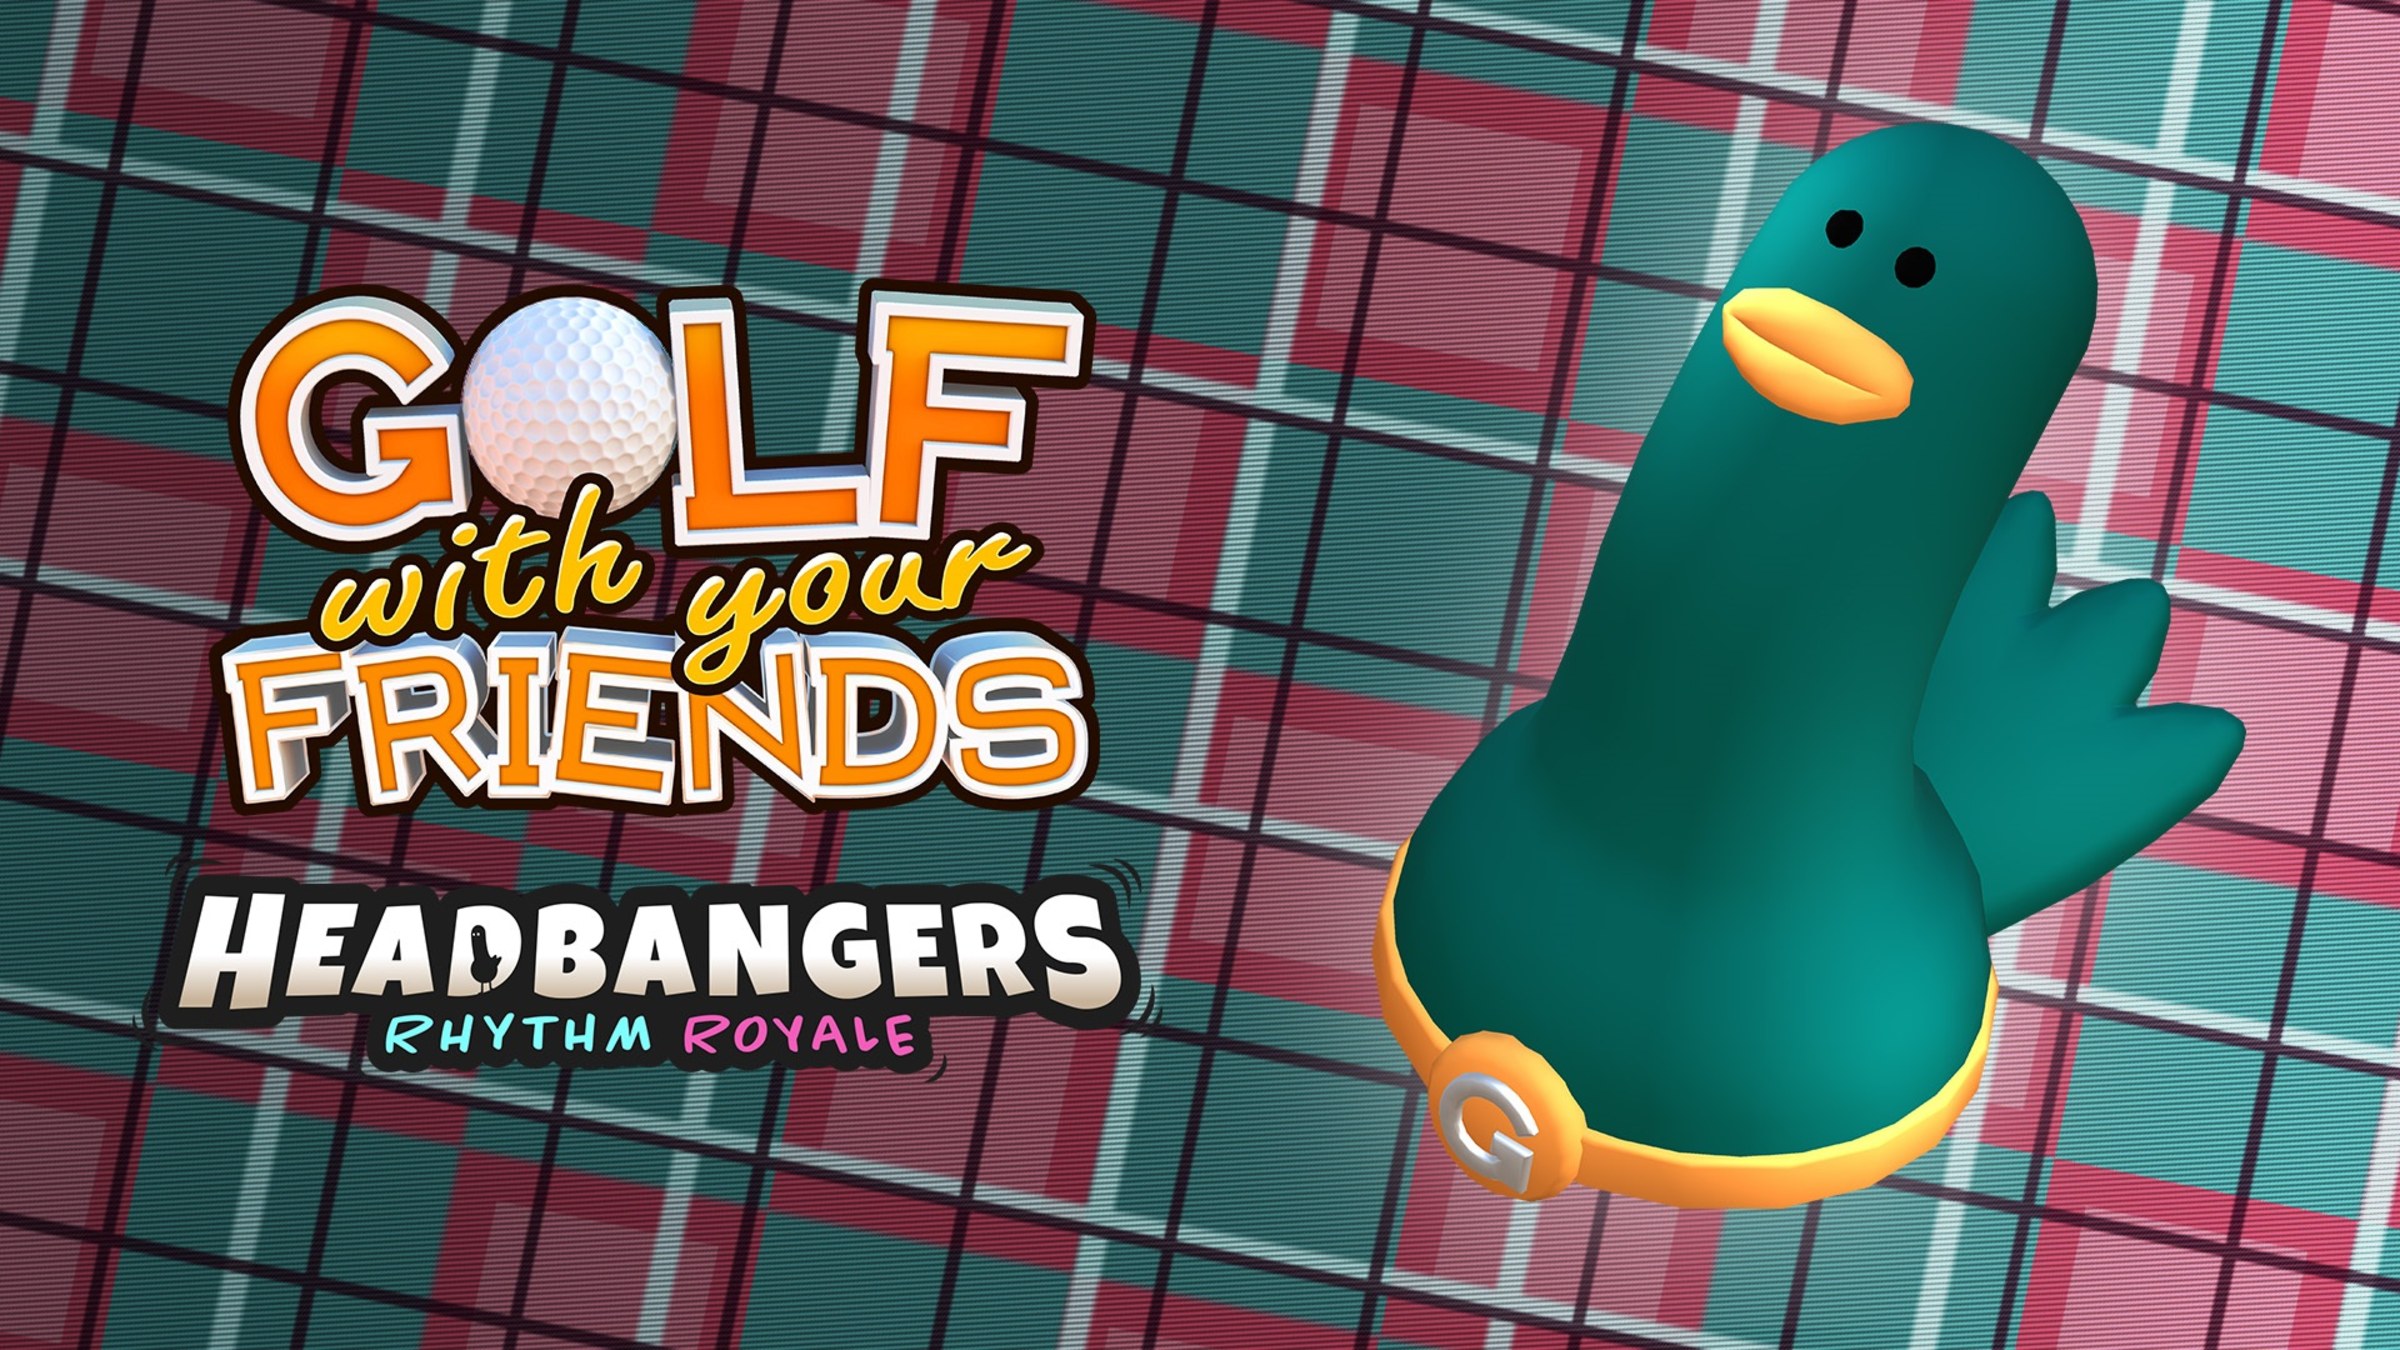 Golf With Your Friends - Headbangers Hat for Nintendo Switch